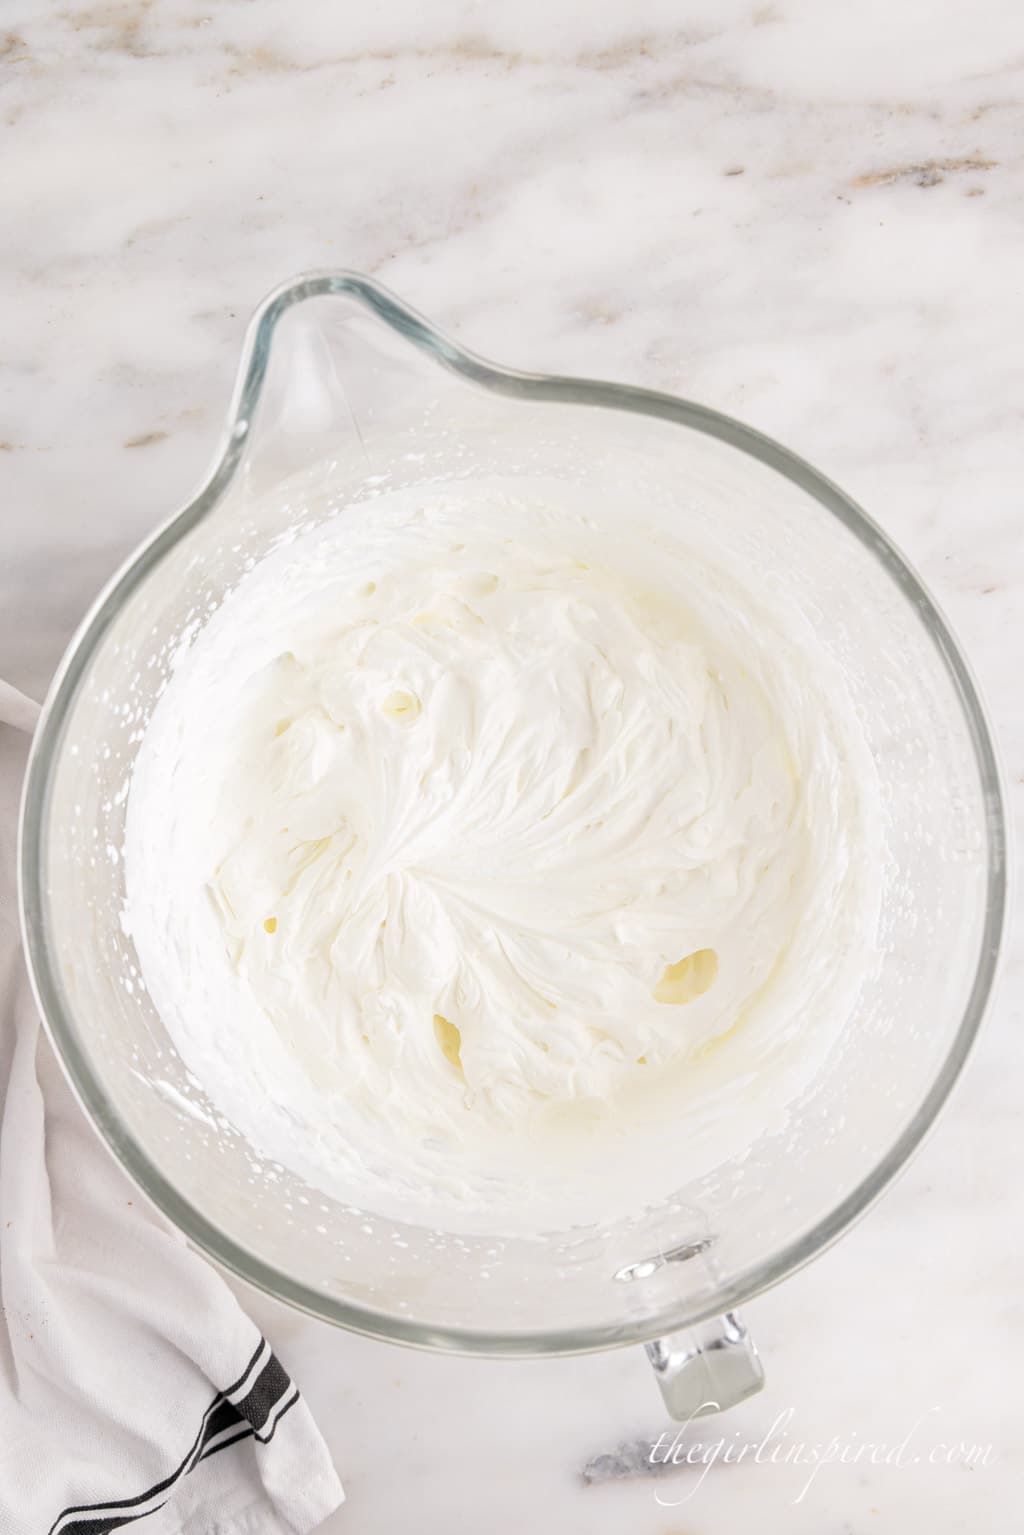 whipped cream in standing mixer bowl.